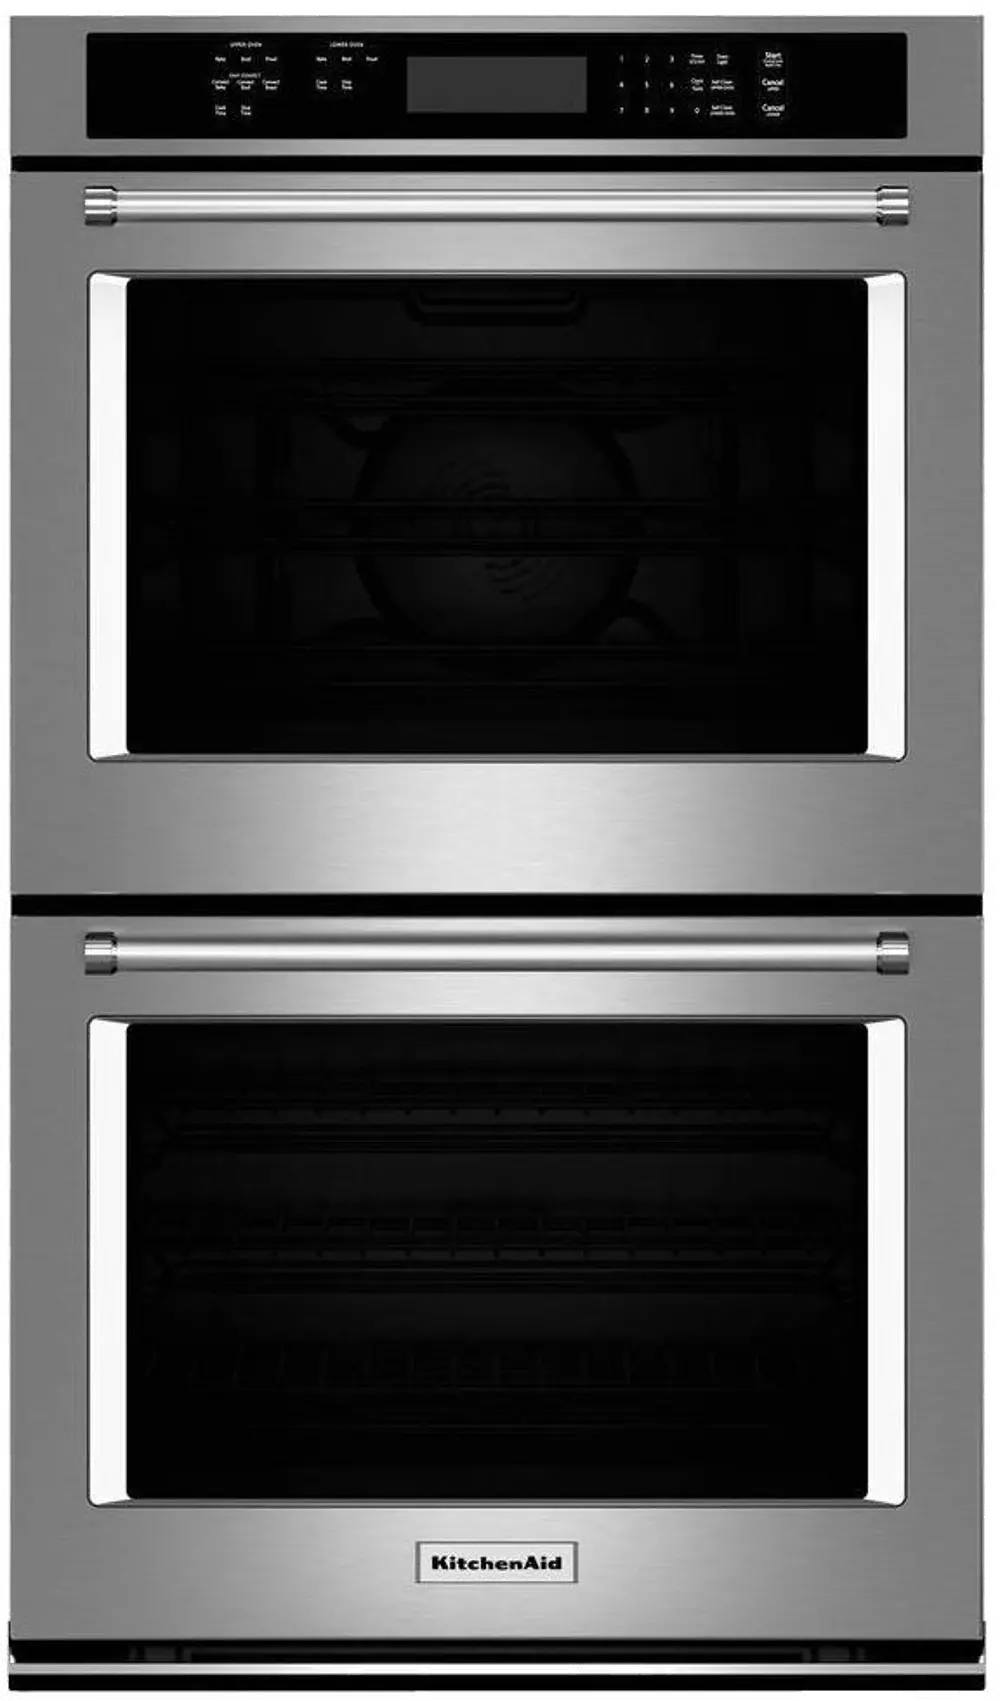 KODE307ESS KitchenAid 27 Inch Double Wall Oven - 8.6 cu. ft. Stainless Steel-1